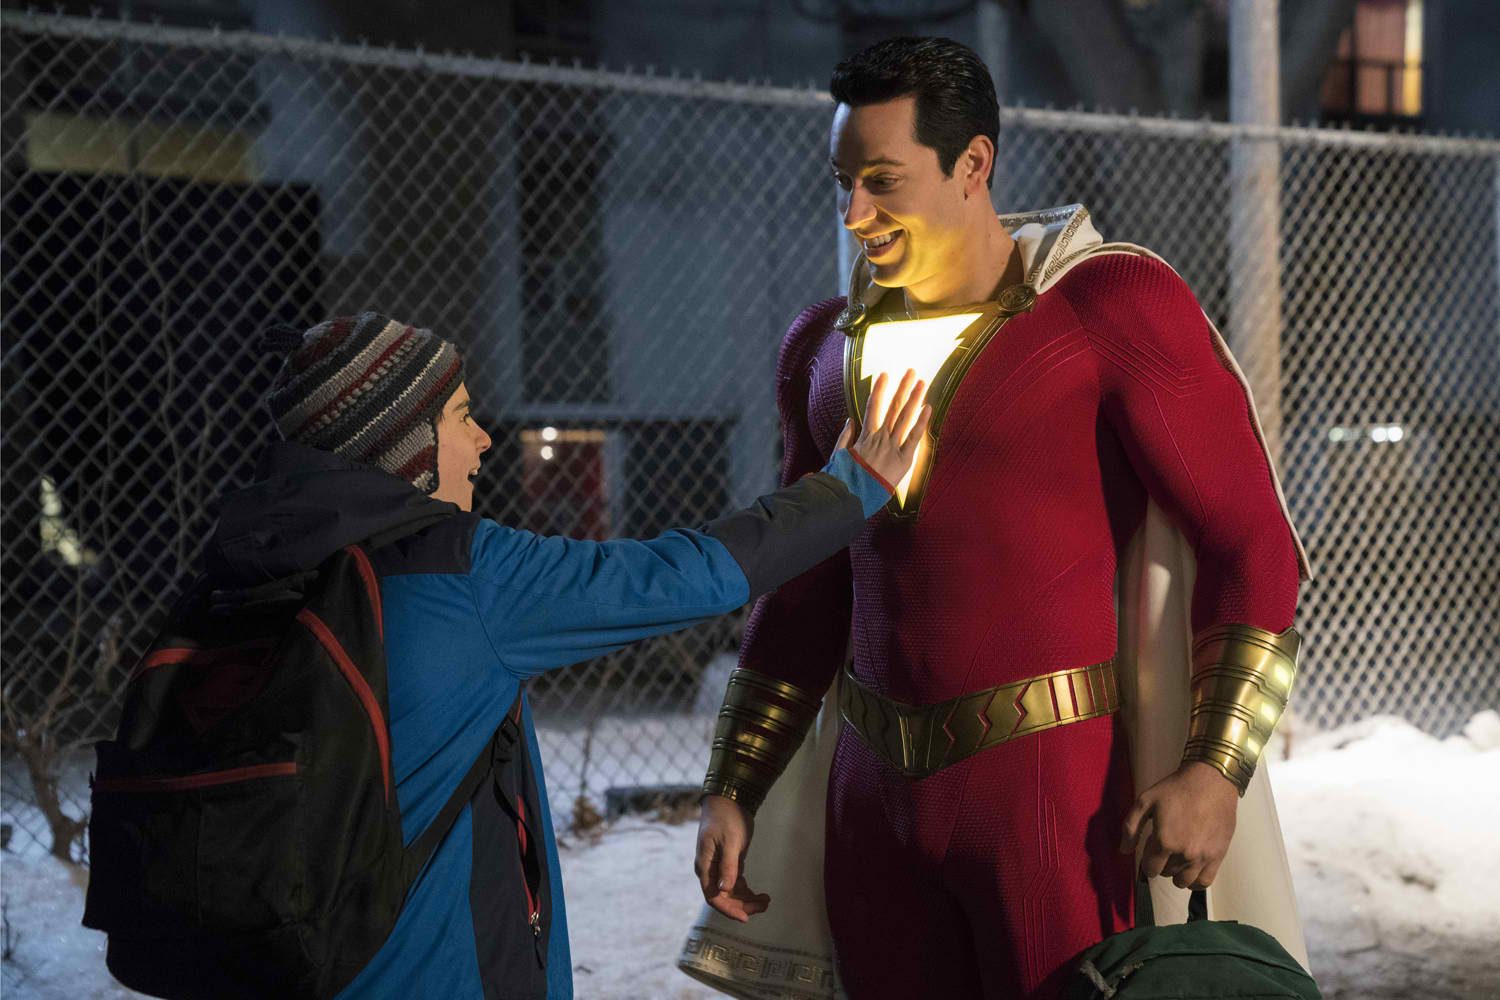 WATCH: Zachary Levi as ‘Shazam’ in first teaser trailer